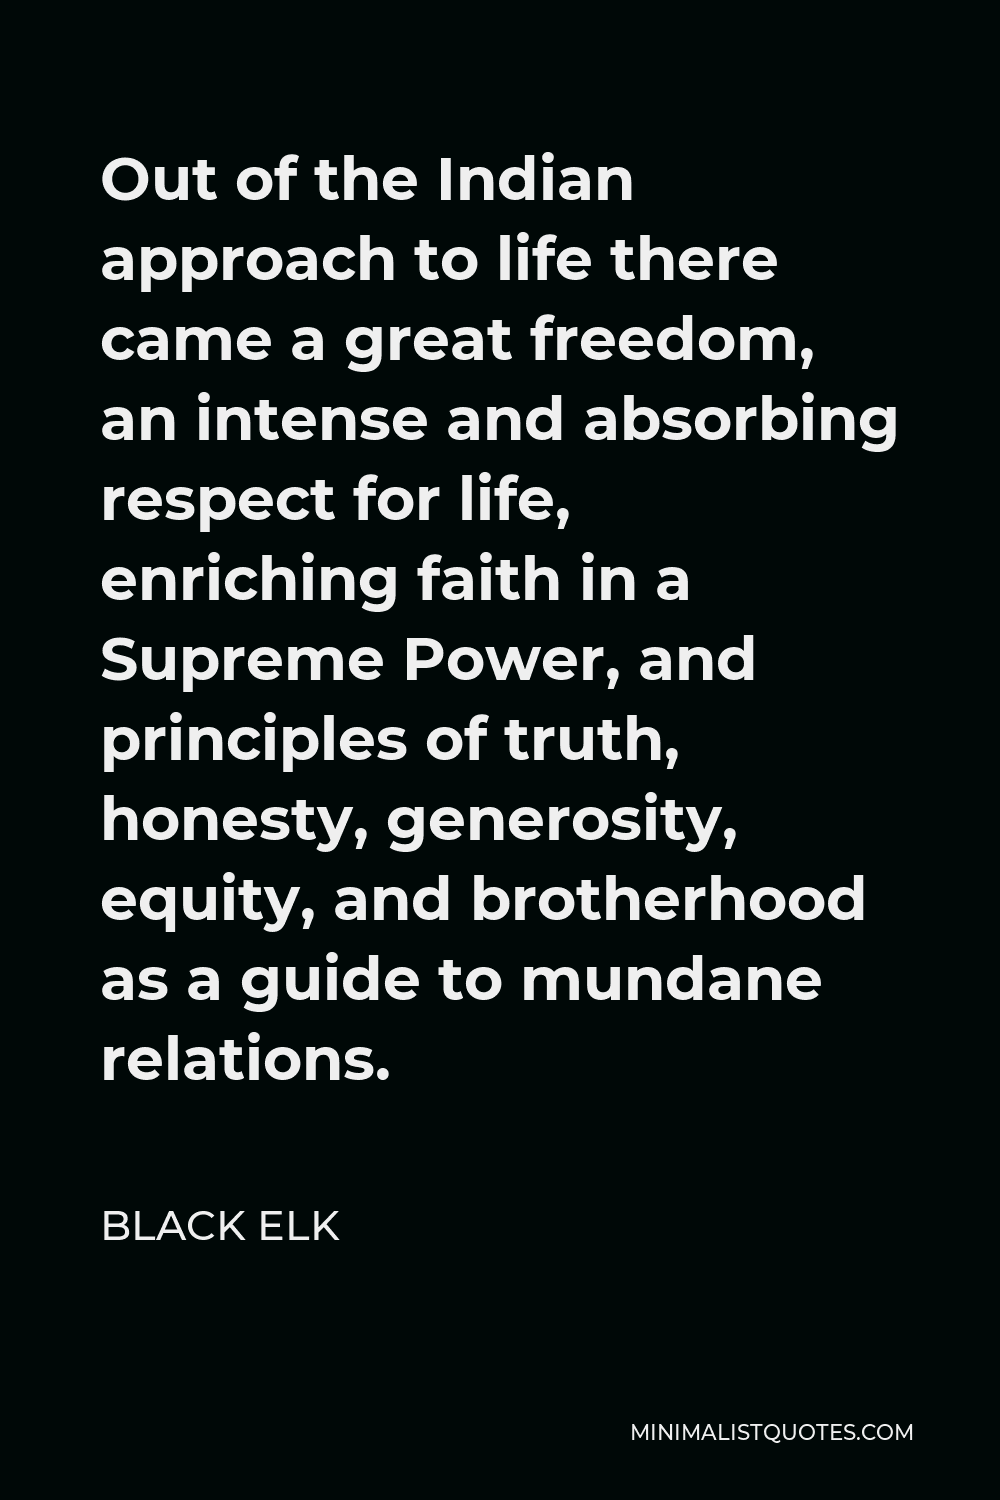 Black Elk Quote - Out of the Indian approach to life there came a great freedom, an intense and absorbing respect for life, enriching faith in a Supreme Power, and principles of truth, honesty, generosity, equity, and brotherhood as a guide to mundane relations.